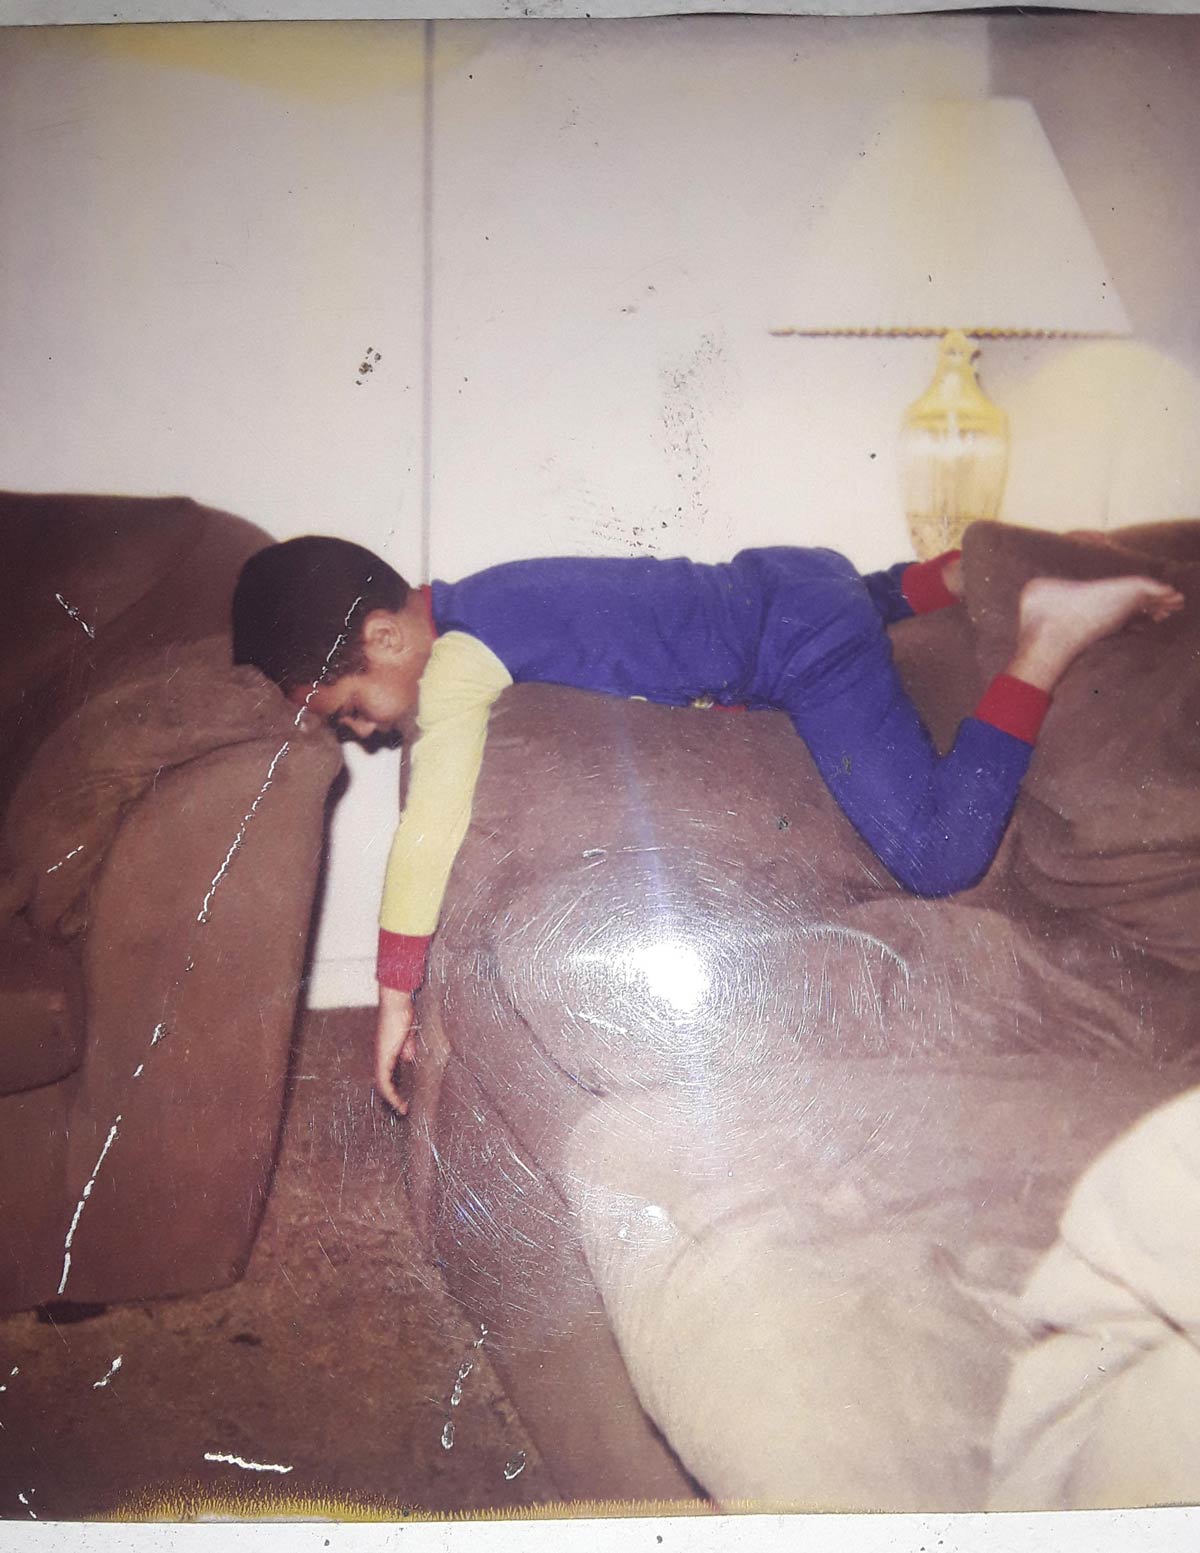 Saw the posts about people falling asleep in some crazy positions as a kid. Here's mine